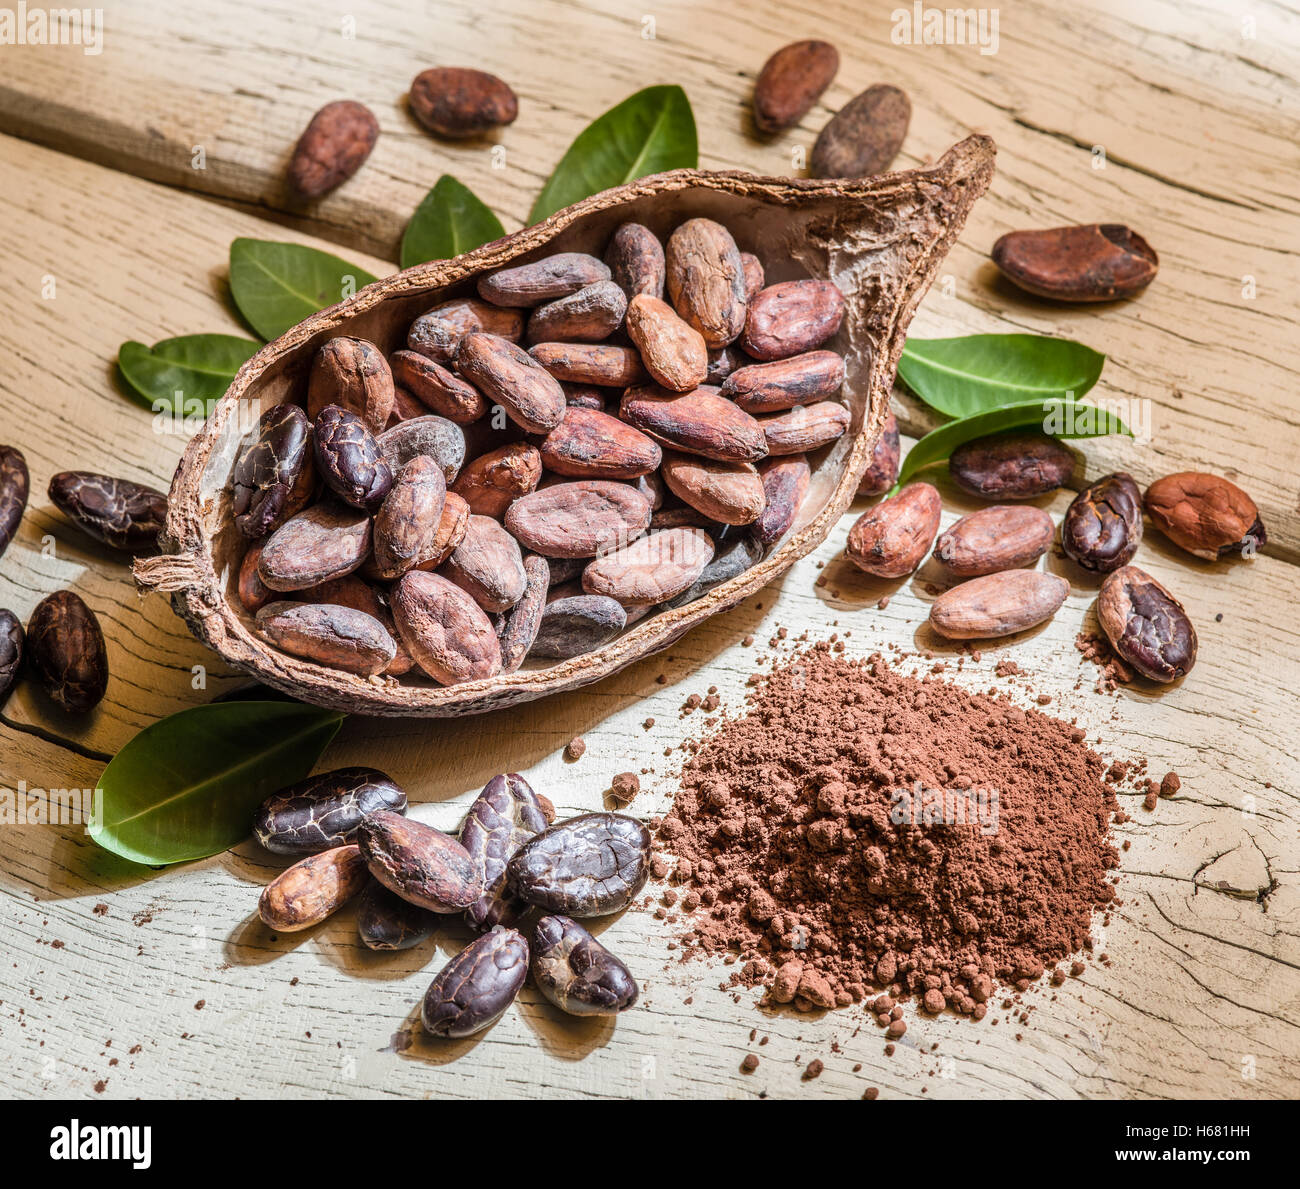 Cocoa powder and cacao beans on the wooden table. Stock Photo